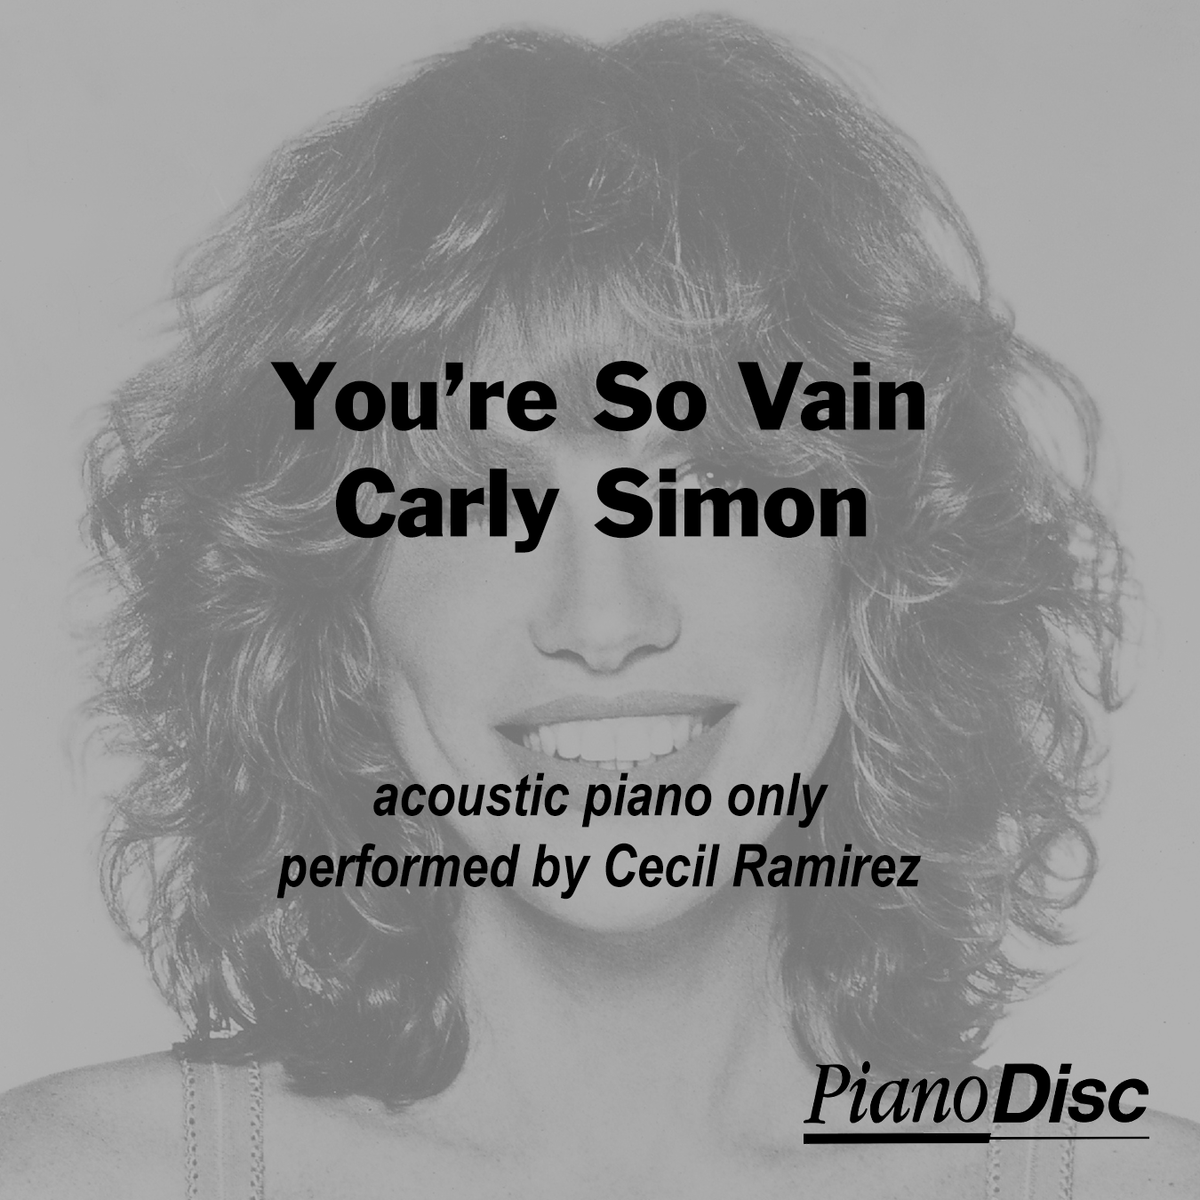 Youre So Vain Carly Simon Pianodisc Music Store 